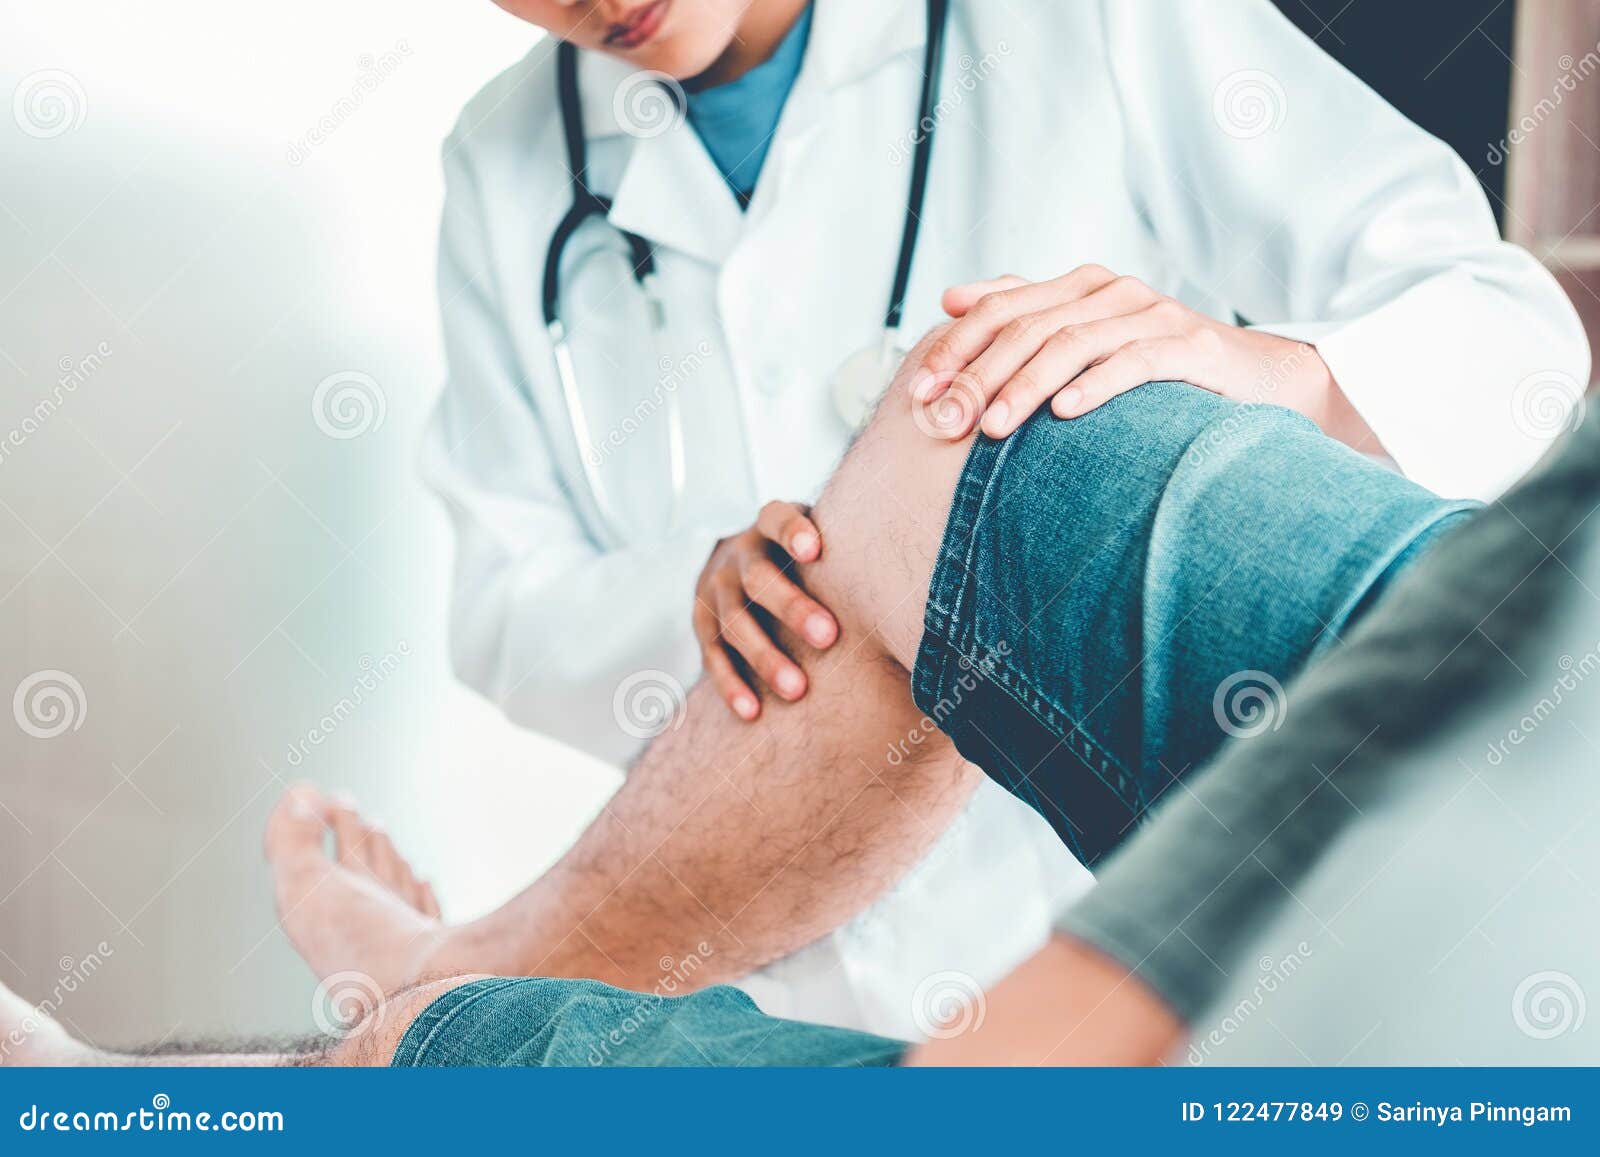 doctor consulting with patient knee problems physical therapy co